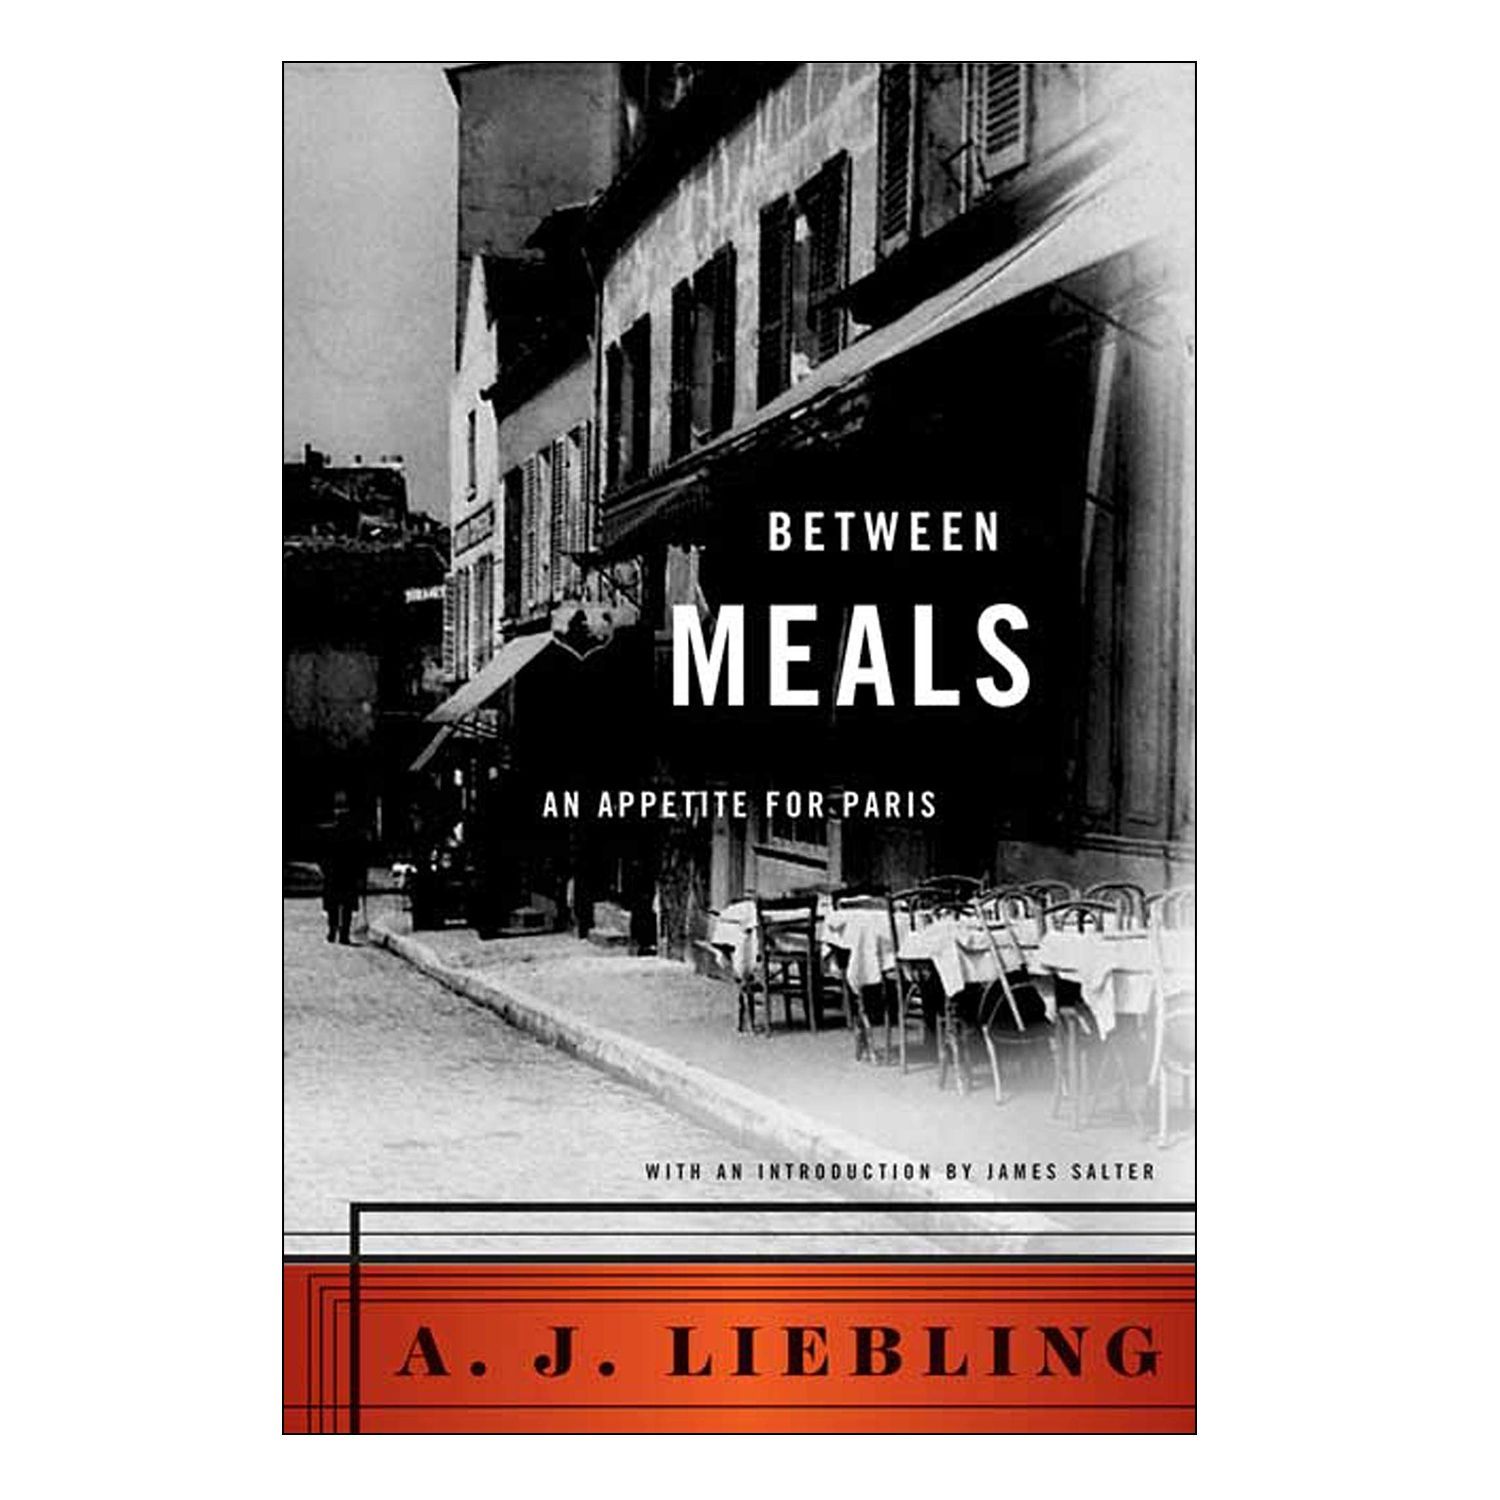 ‘Between Meals: An Appetite for Paris’ by A.J. Liebling